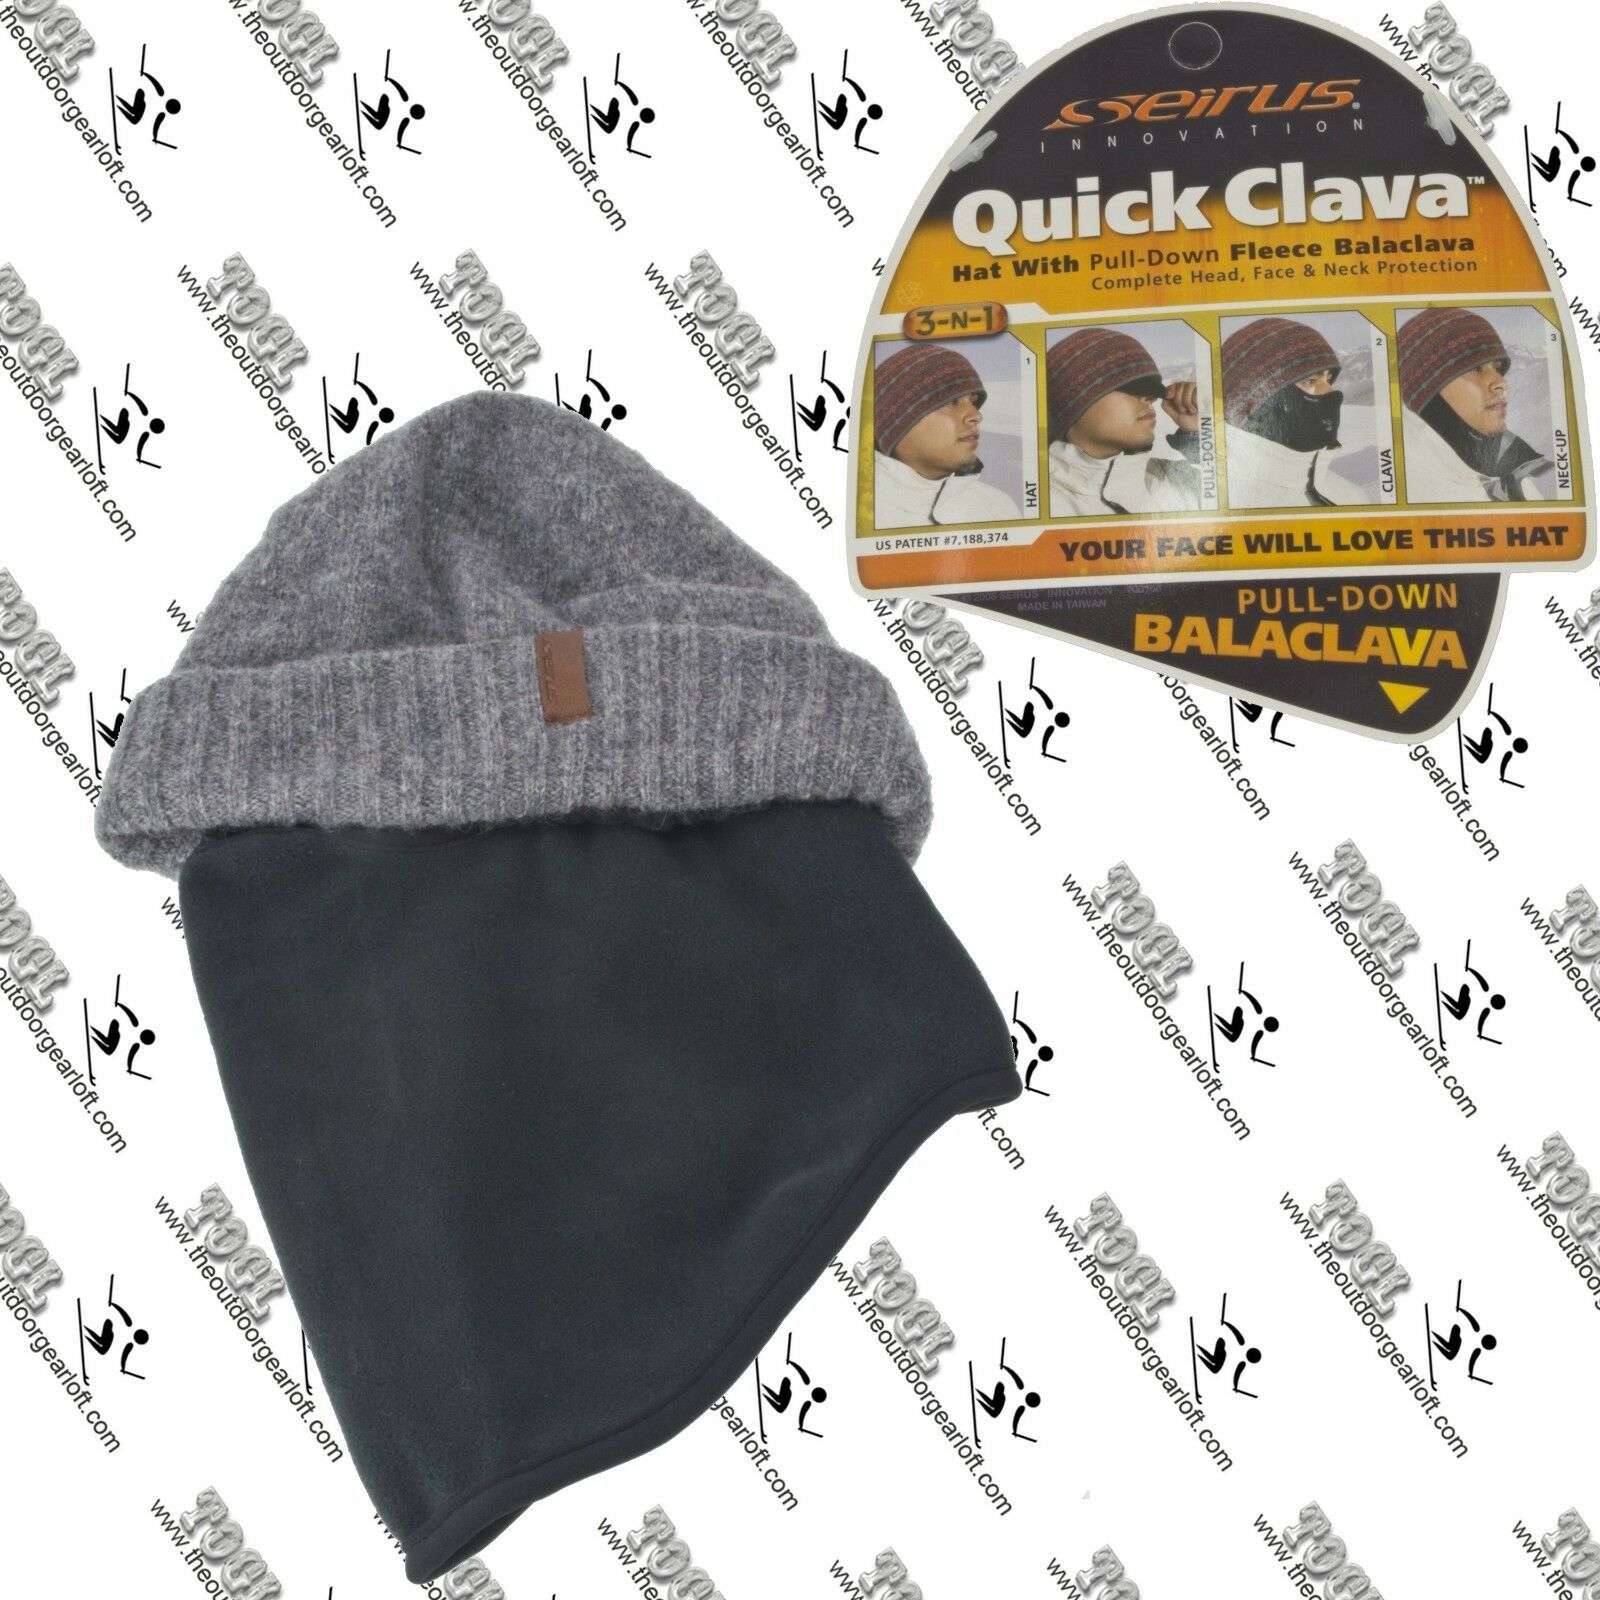 Details about   SEIRUS WOMENS MENS 3261 VICE QUICK CLAVA HAT BEANIE NECK GAITER COMBO 3 IN 1 